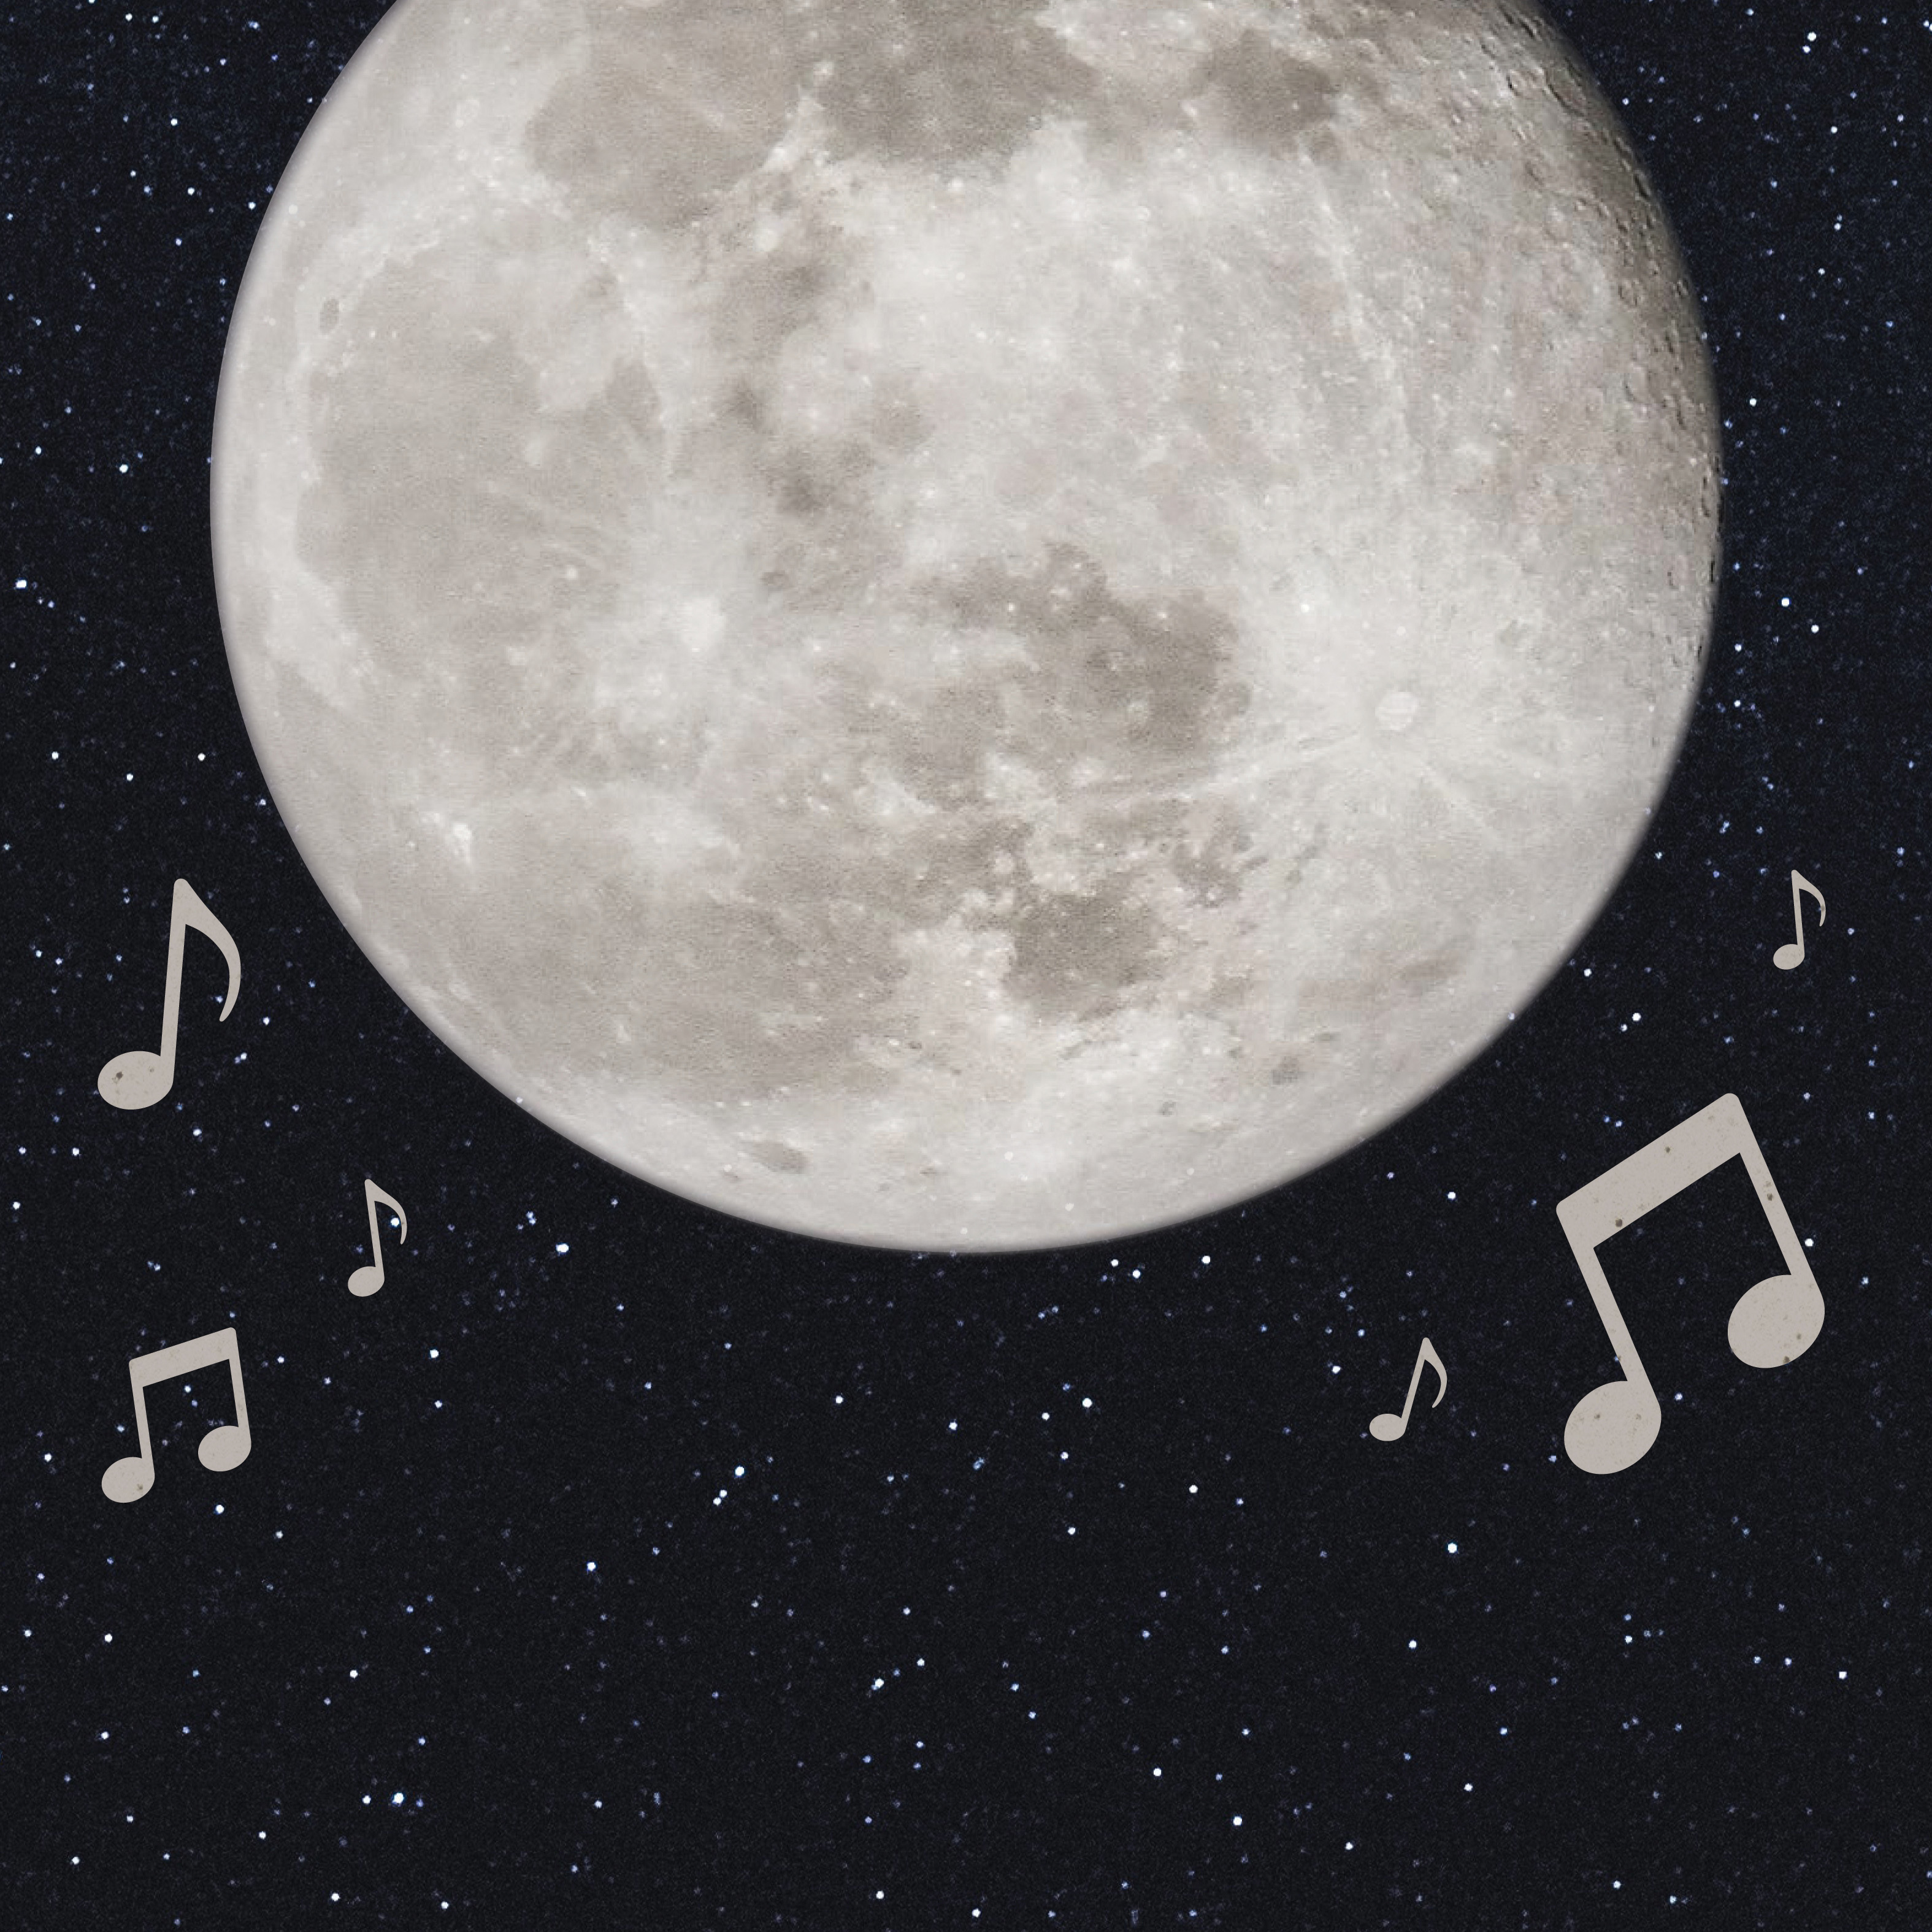 Full moon surrounded by music notes and stars.